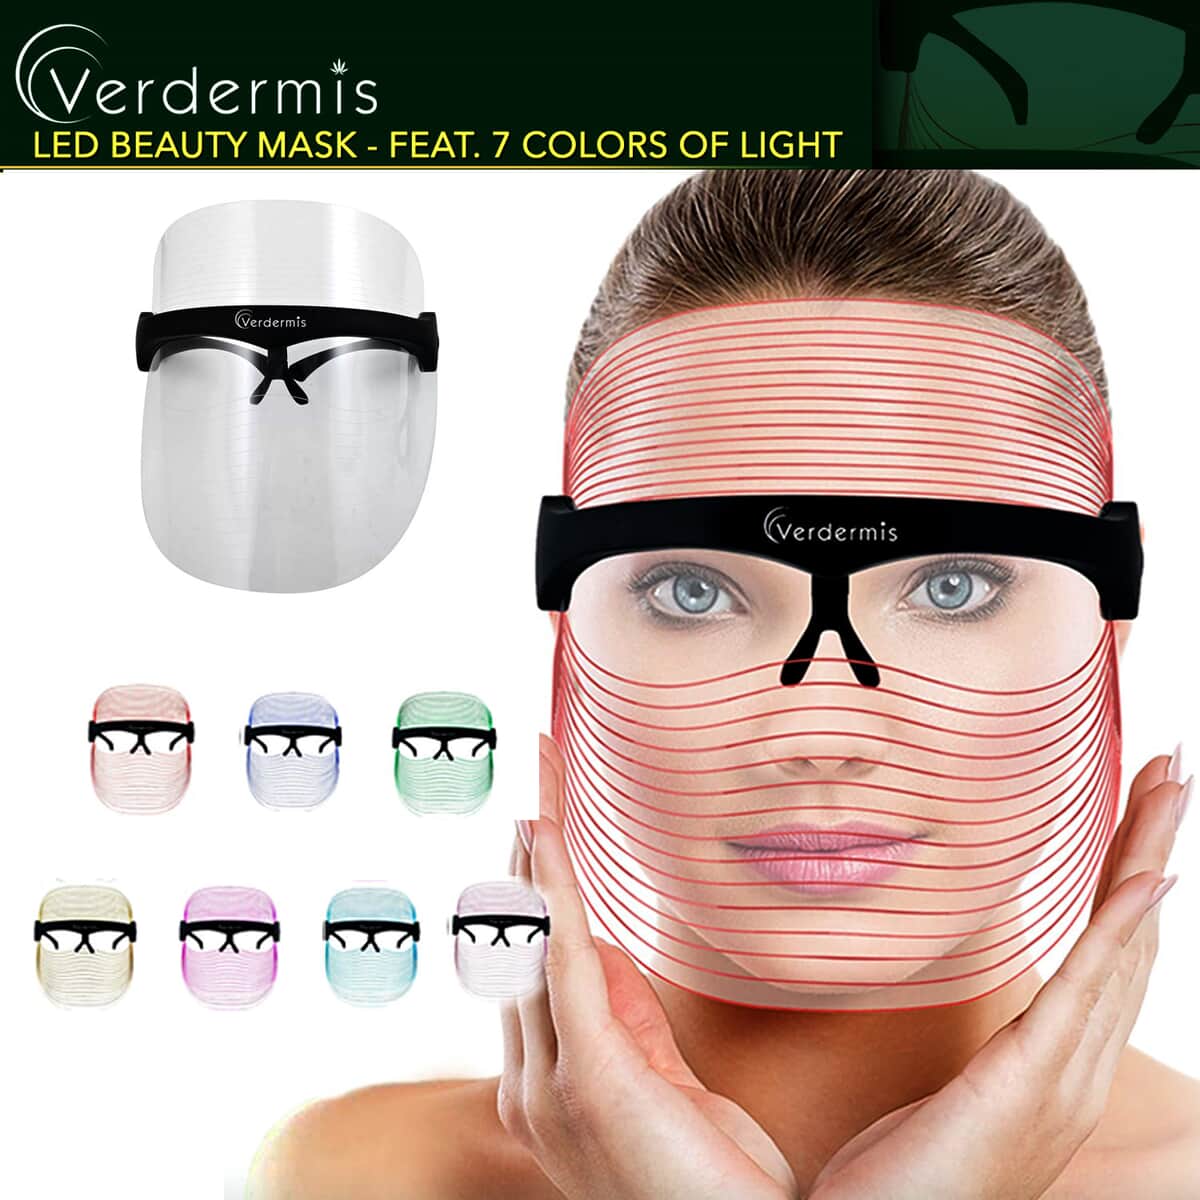 Verdermis 7 Color LED Beauty Mask (1 Year Warranty) image number 1